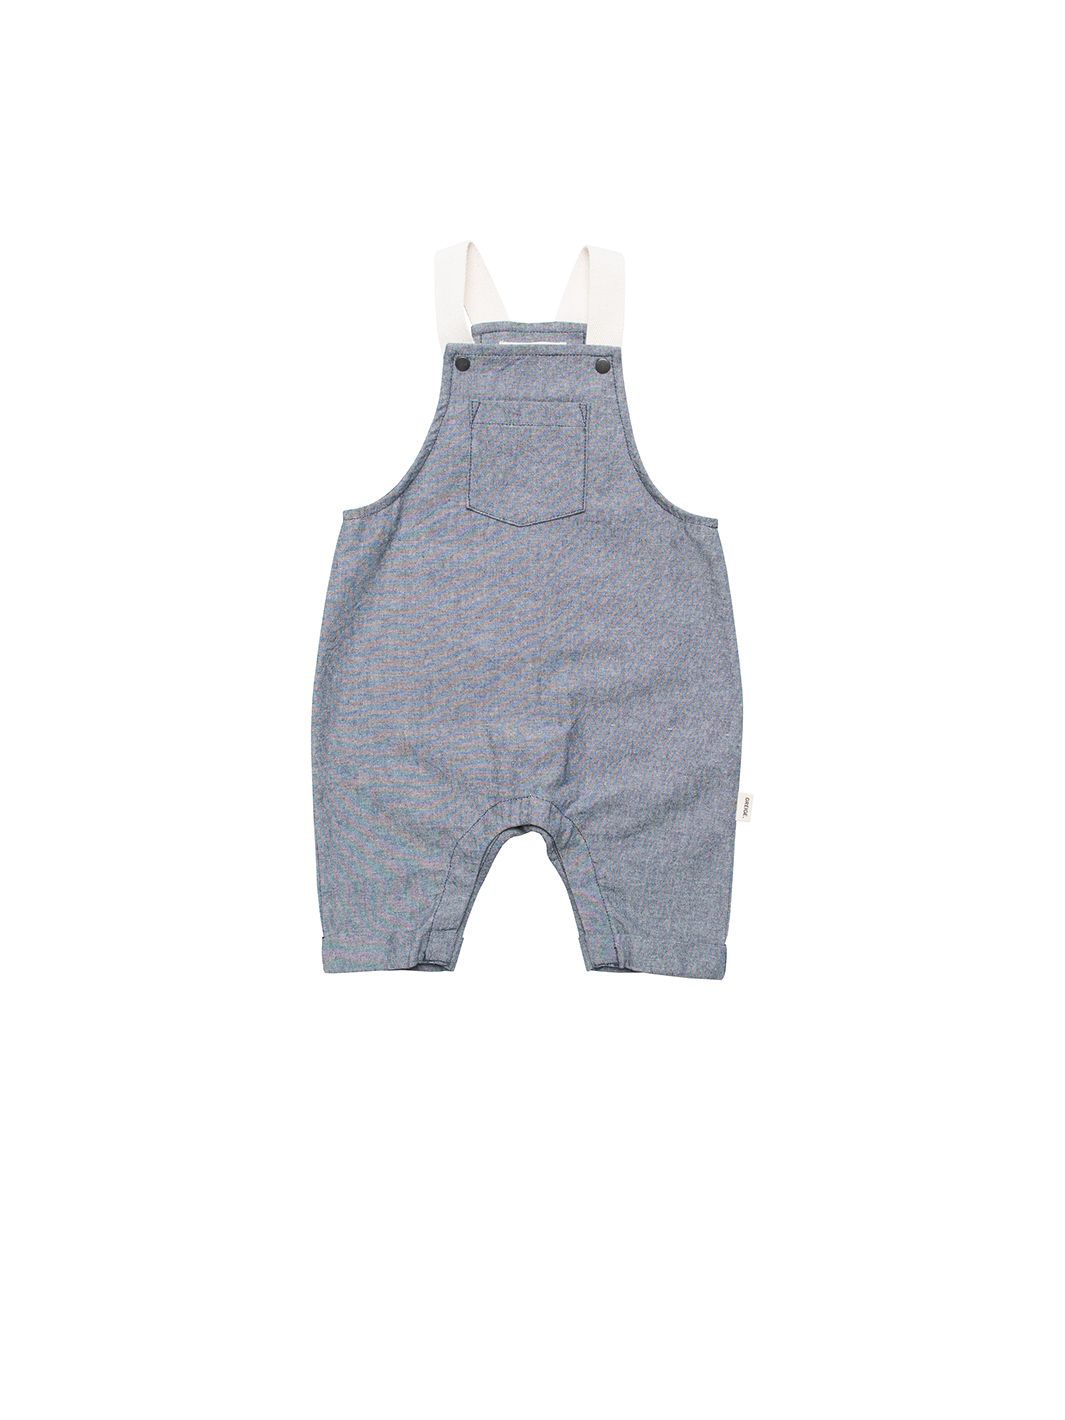 The Overalls - Navy Chambray